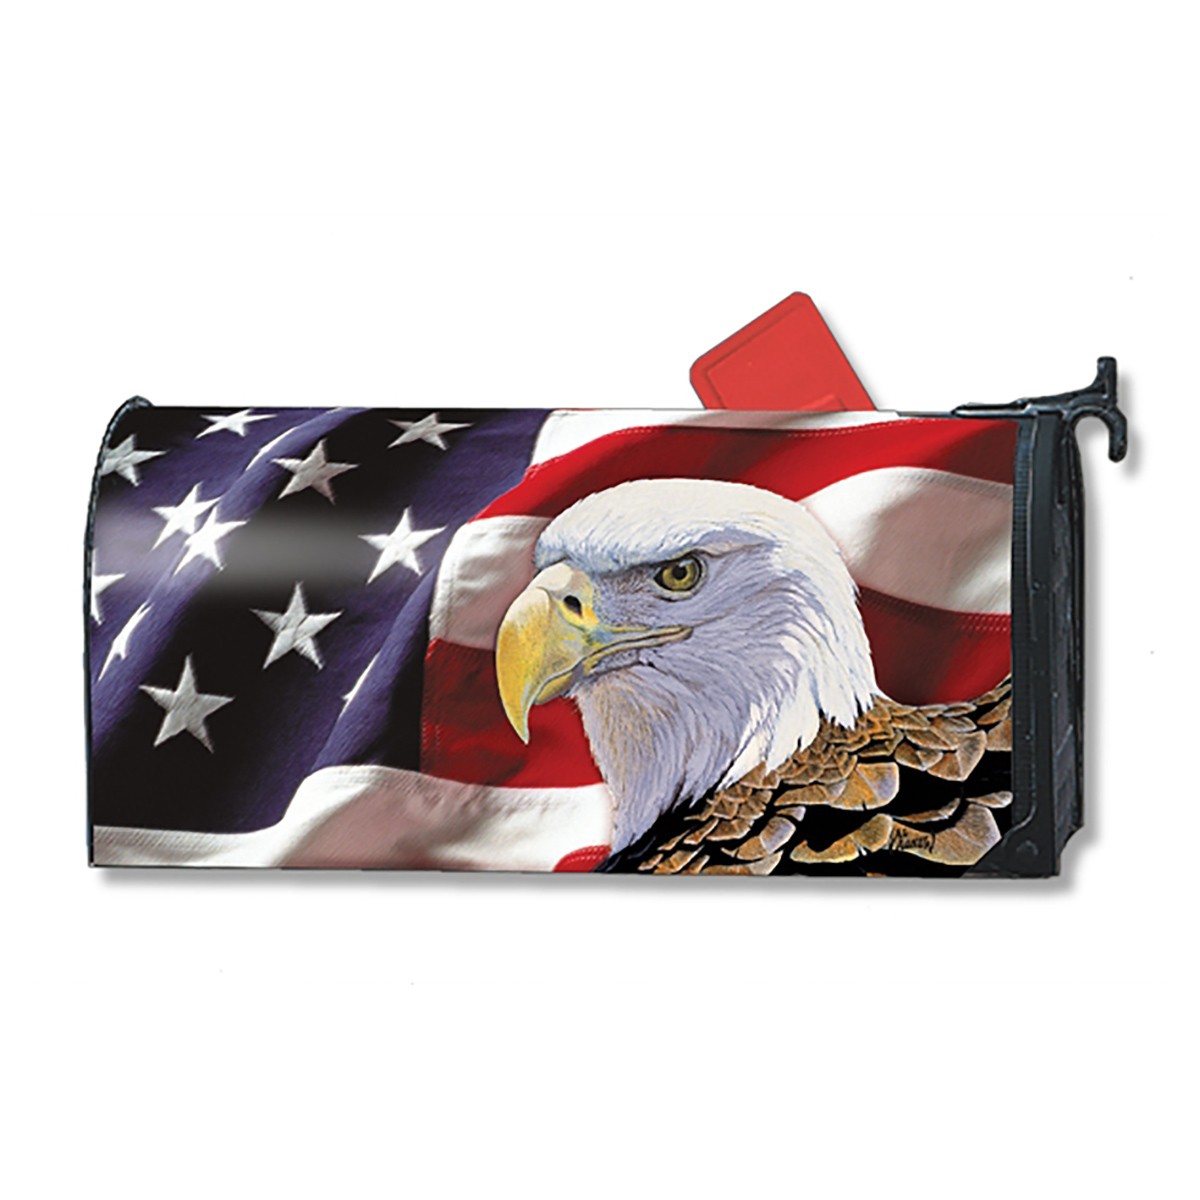 Magnetic Mailbox Cover - Spirit of Freedom